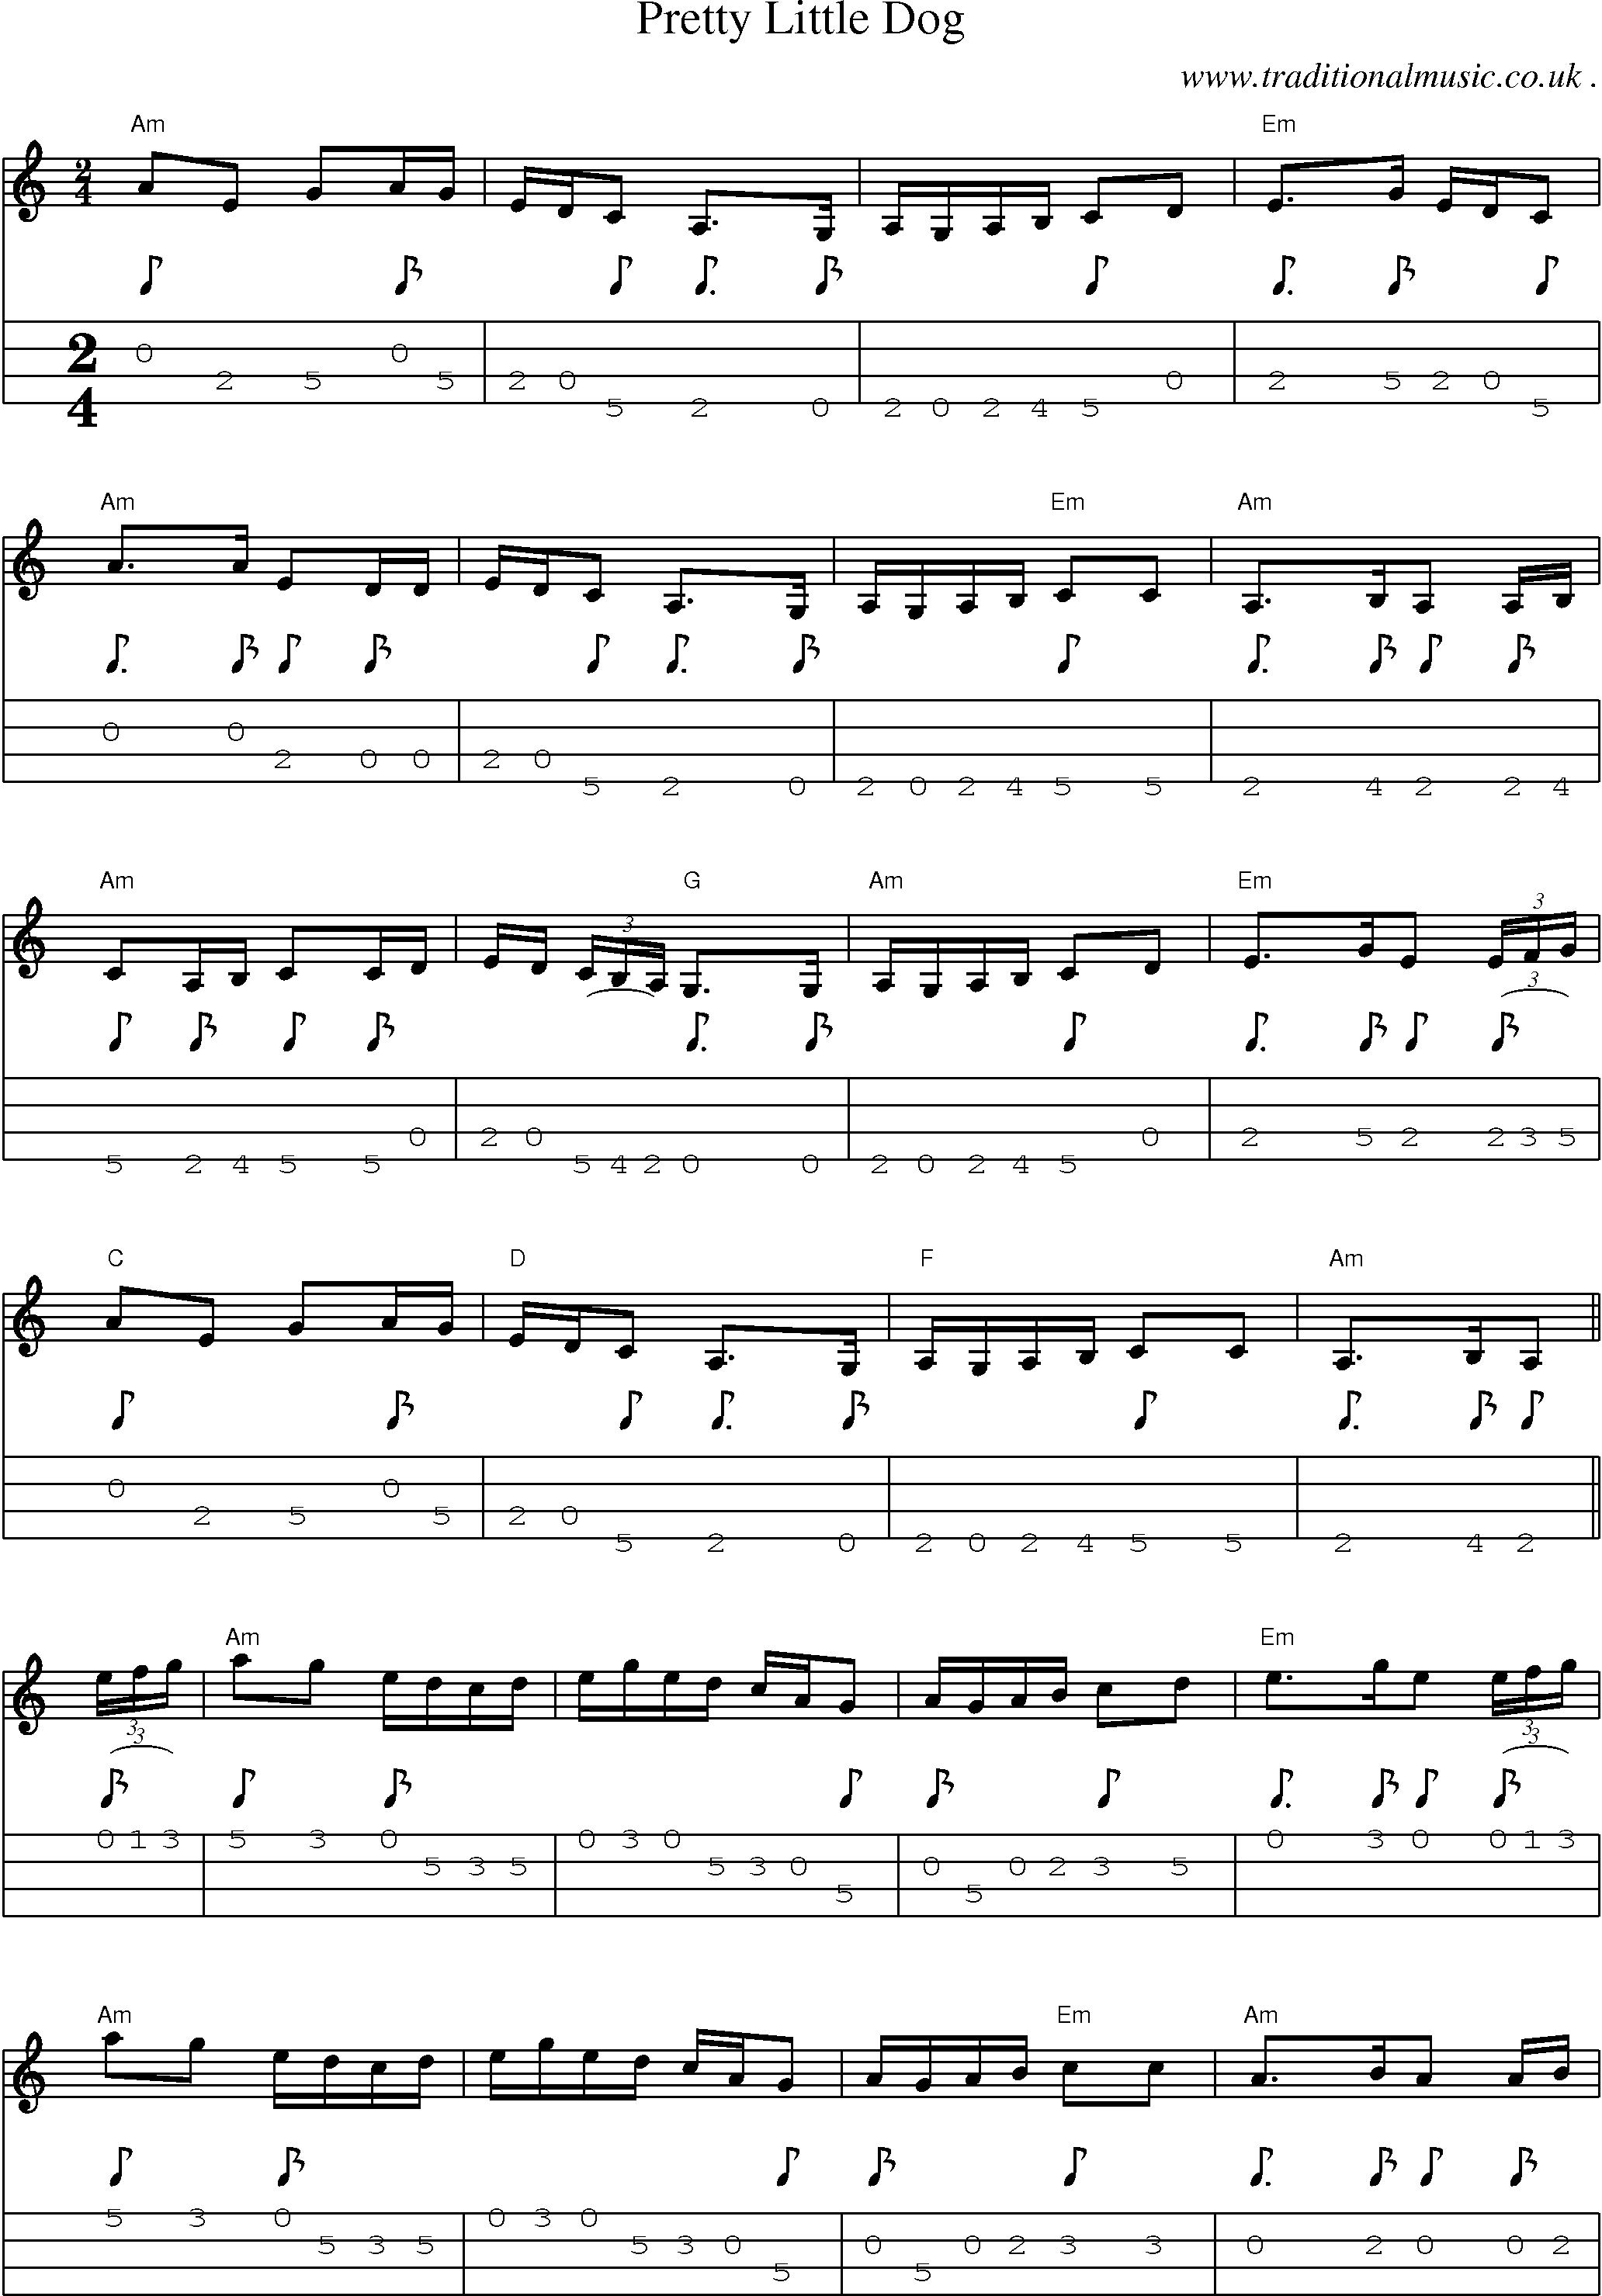 Music Score and Guitar Tabs for Pretty Little Dog